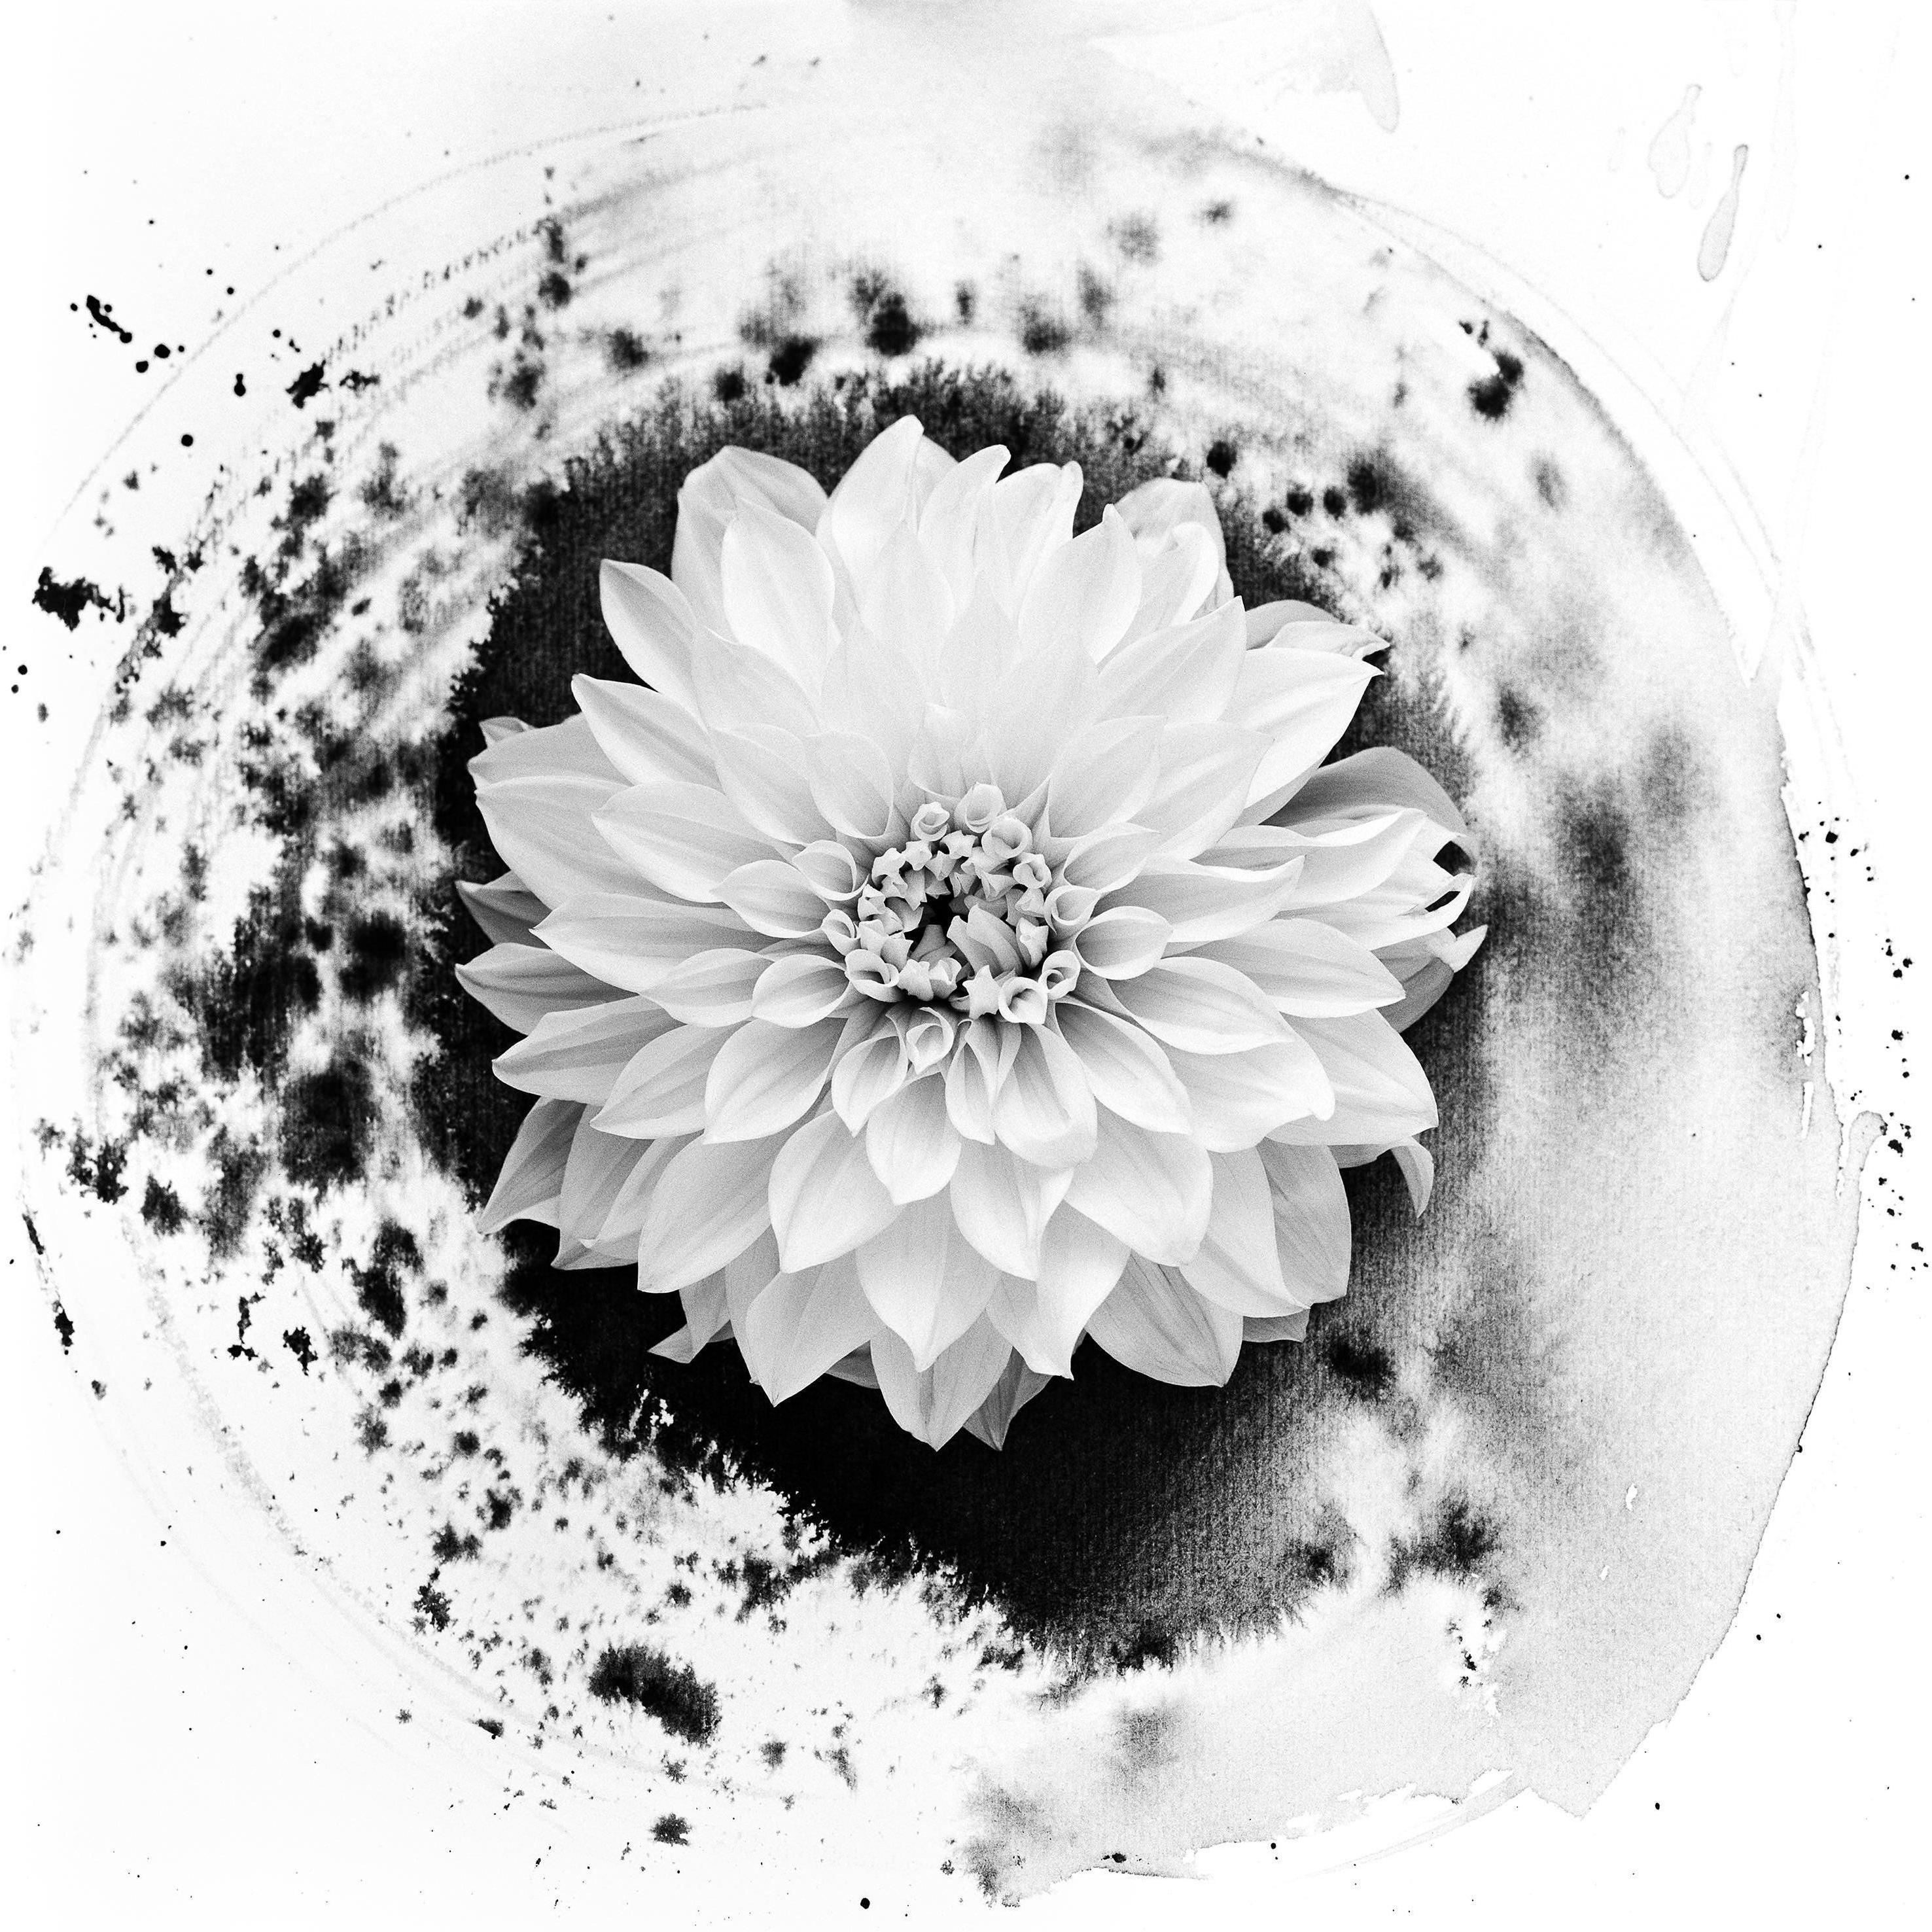 Dahlia on Ink - floral film photography in composition with ink abstraction